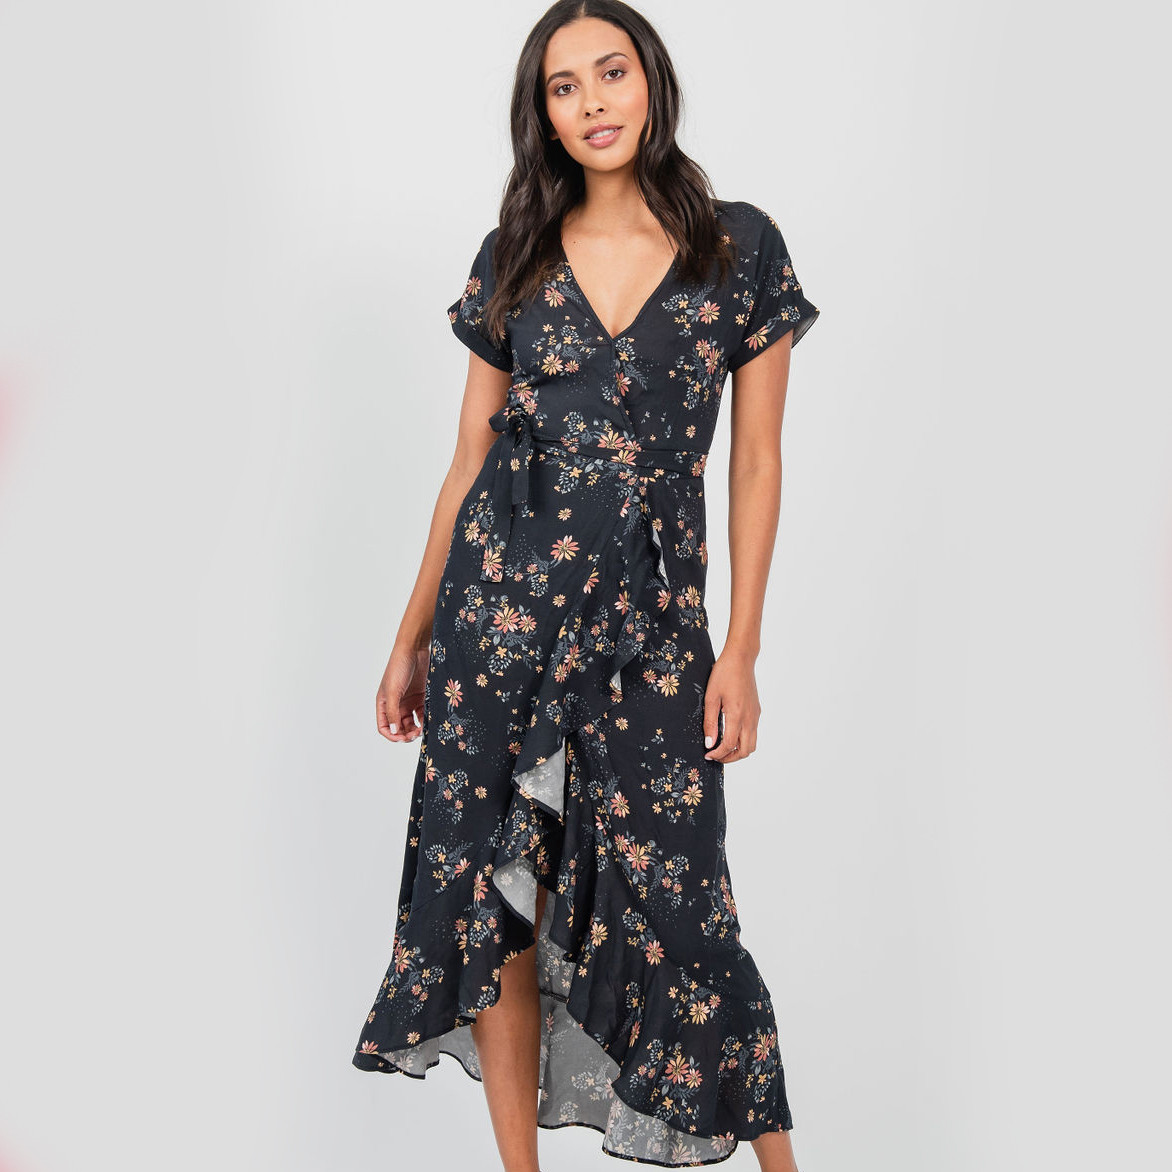 Woman in a Black Floral Wrap Dress - Live and Let Live Casual Summer Dress 